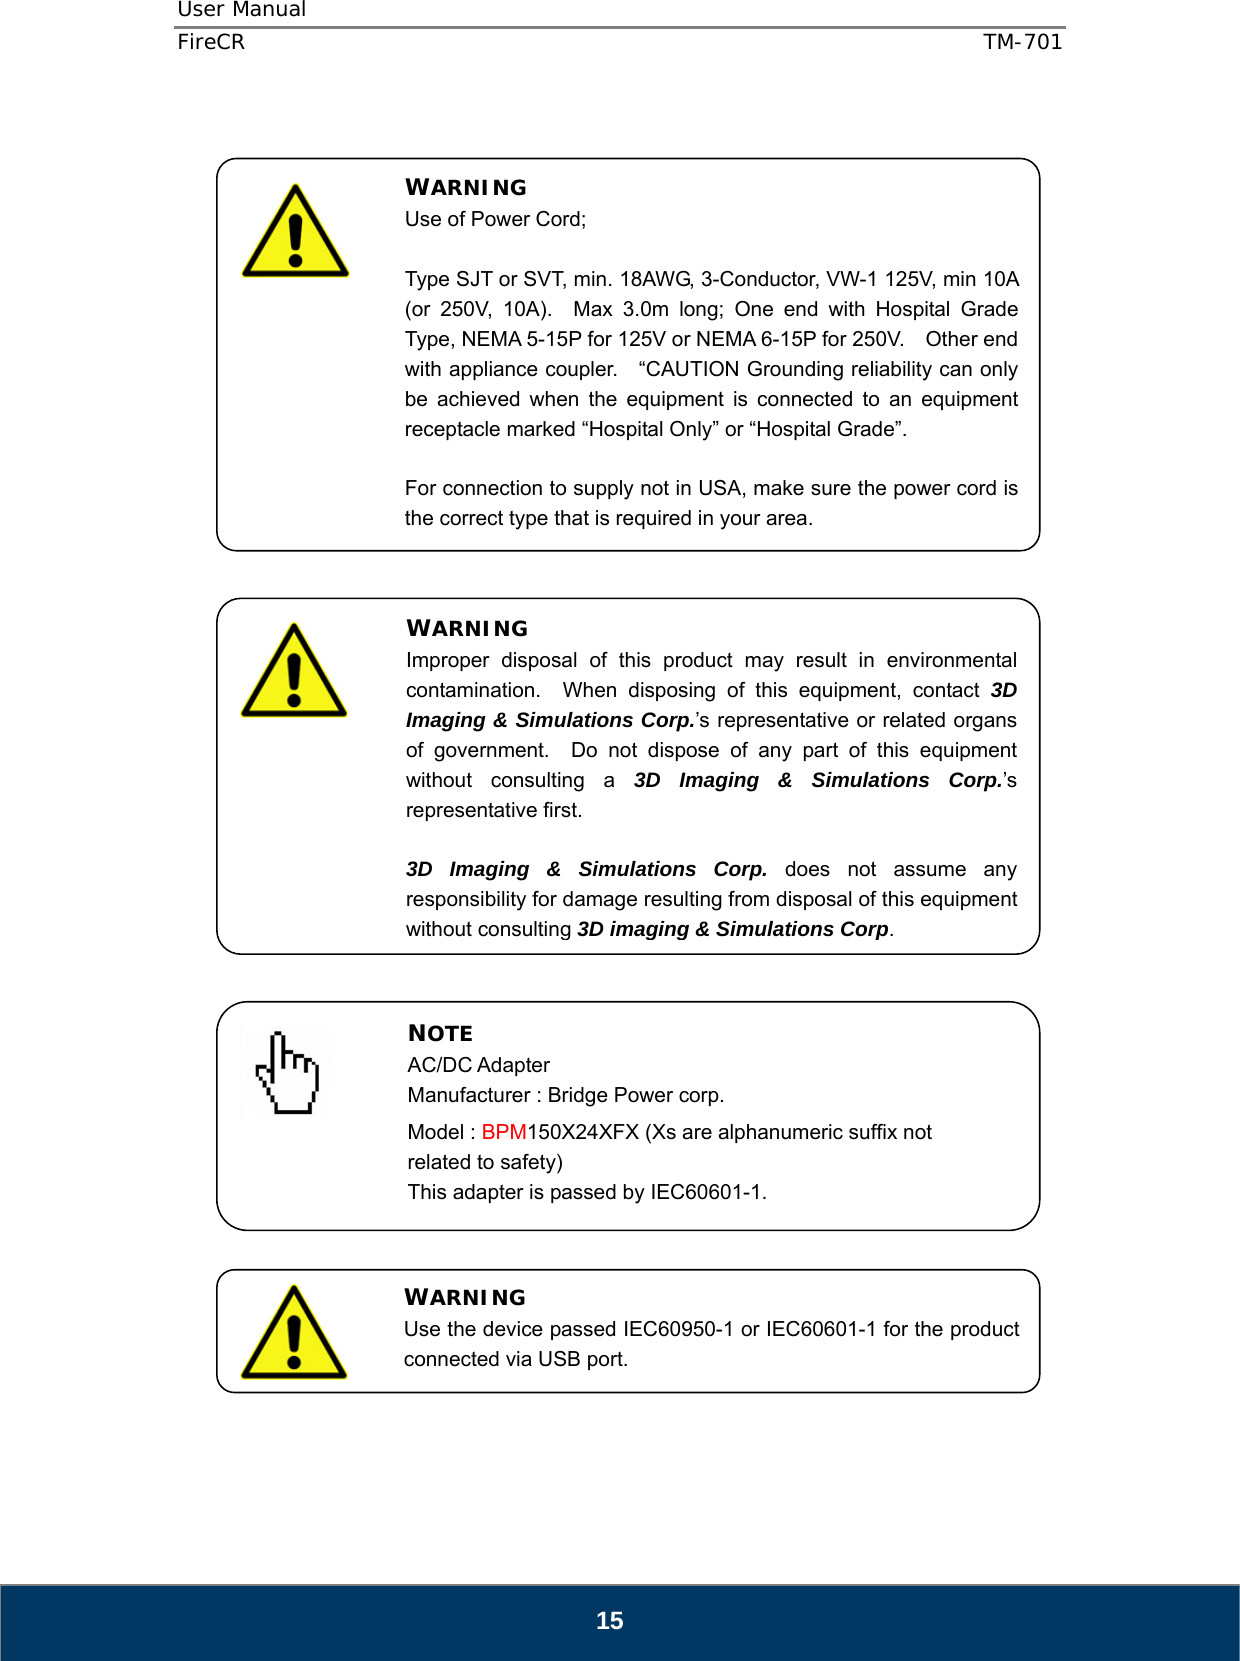 User Manual  FireCR  TM-701   15                                              WARNING Use of Power Cord;  Type SJT or SVT, min. 18AWG, 3-Conductor, VW-1 125V, min 10A (or 250V, 10A).  Max 3.0m long; One end with Hospital Grade Type, NEMA 5-15P for 125V or NEMA 6-15P for 250V.    Other end with appliance coupler.    “CAUTION Grounding reliability can only be achieved when the equipment is connected to an equipment receptacle marked “Hospital Only” or “Hospital Grade”.  For connection to supply not in USA, make sure the power cord is the correct type that is required in your area. WARNING Improper disposal of this product may result in environmental contamination.  When disposing of this equipment, contact 3D Imaging &amp; Simulations Corp.’s representative or related organs of government.  Do not dispose of any part of this equipment without consulting a 3D Imaging &amp; Simulations Corp.’s representative first.  3D Imaging &amp; Simulations Corp. does not assume any responsibility for damage resulting from disposal of this equipment without consulting 3D imaging &amp; Simulations Corp. NOTE AC/DC Adapter Manufacturer : Bridge Power corp. Model : BPM150X24XFX (Xs are alphanumeric suffix not related to safety) This adapter is passed by IEC60601-1. WARNING Use the device passed IEC60950-1 or IEC60601-1 for the product connected via USB port. 